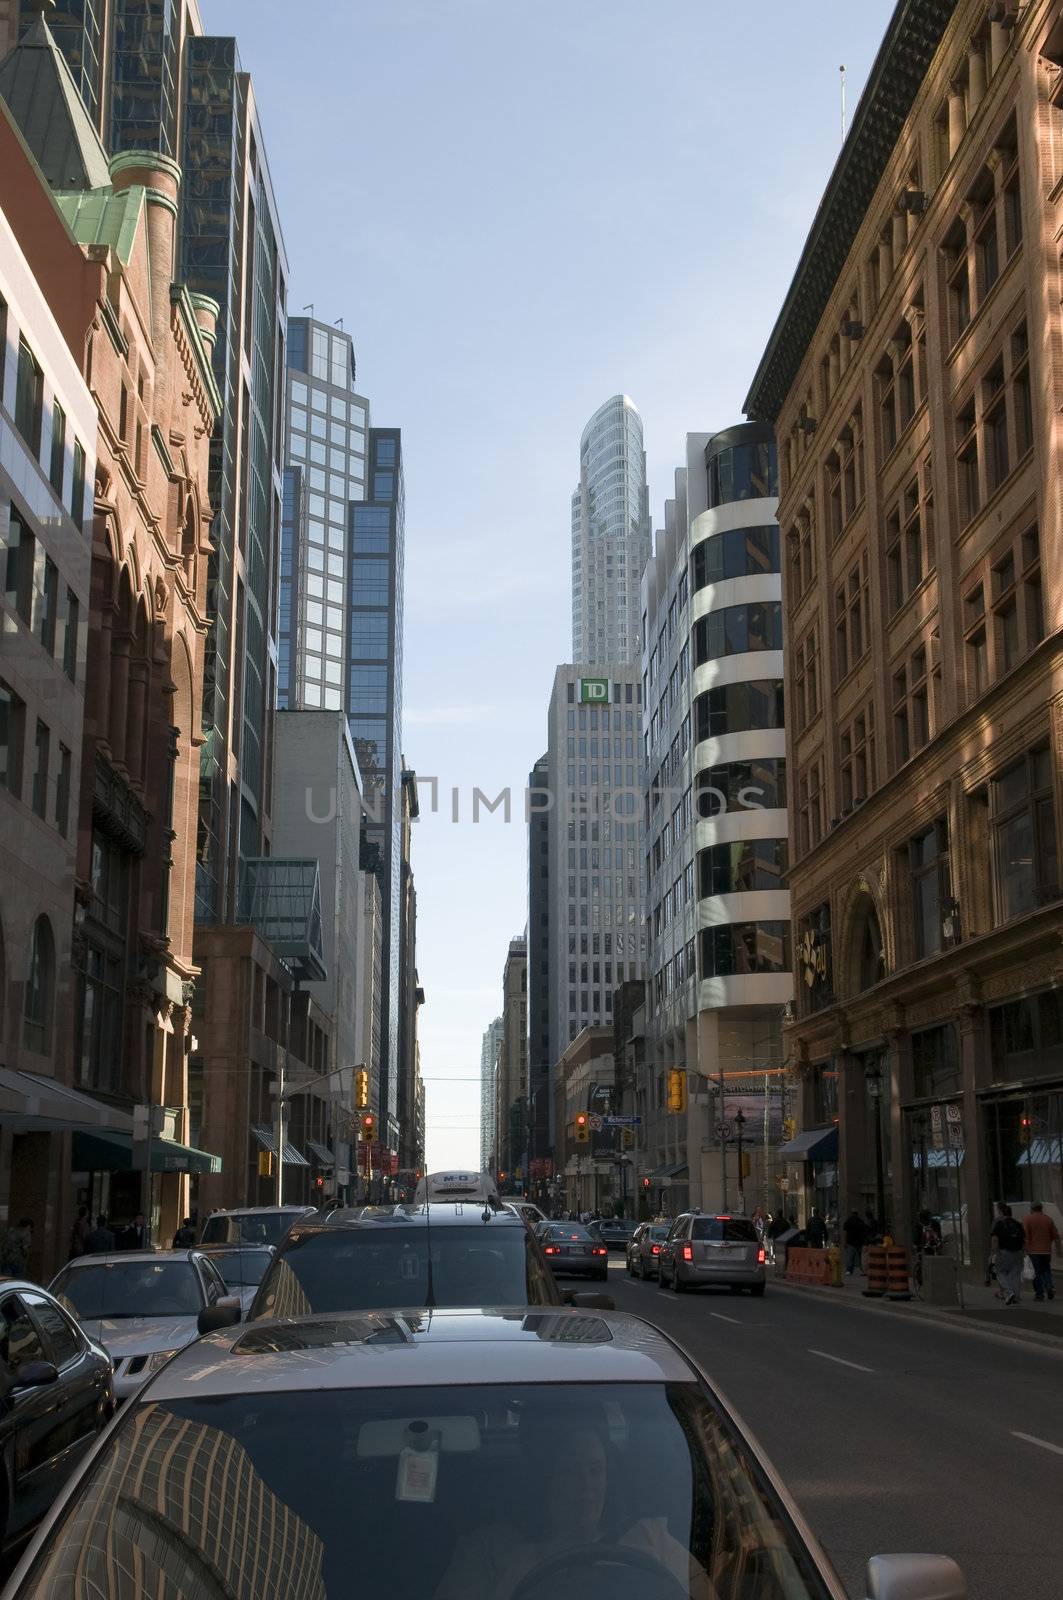 A fragment of high-rise buildings in the streets of Toronto, Canada
